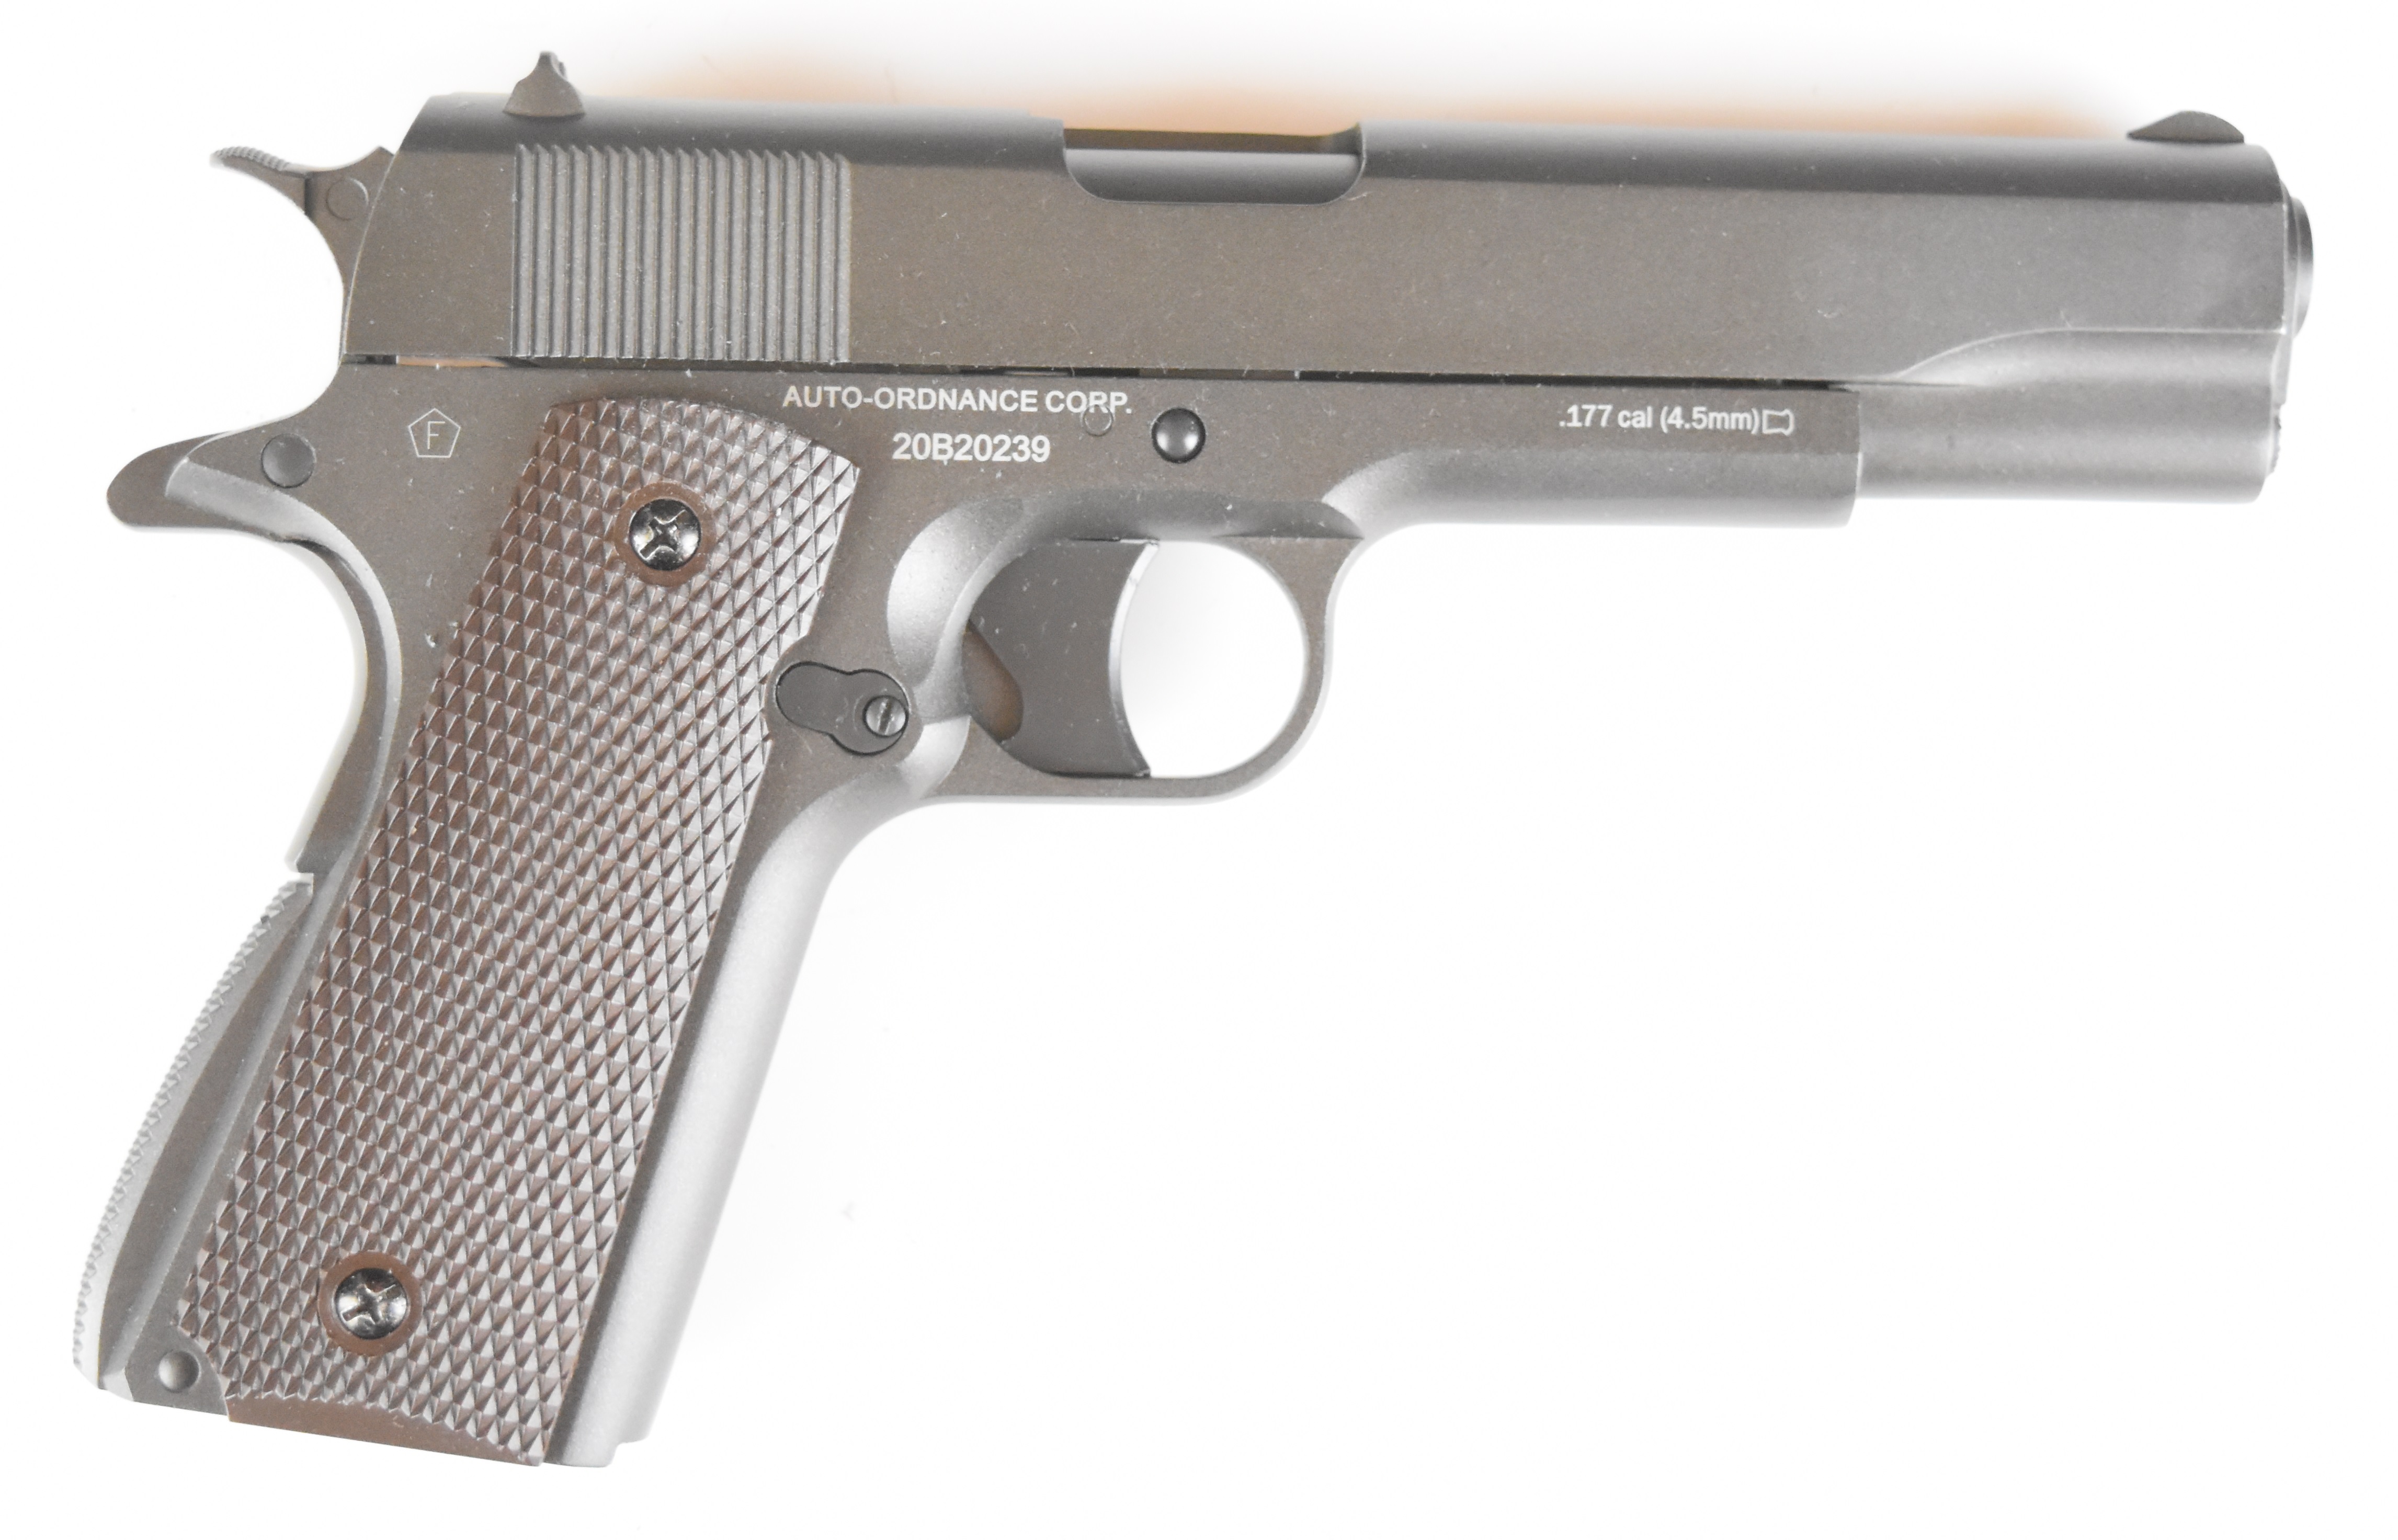 Cybergun Auto-Ordnance 1911 A1 US Army .177 CO2 air pistol with chequered faux wooden grips and - Image 19 of 34